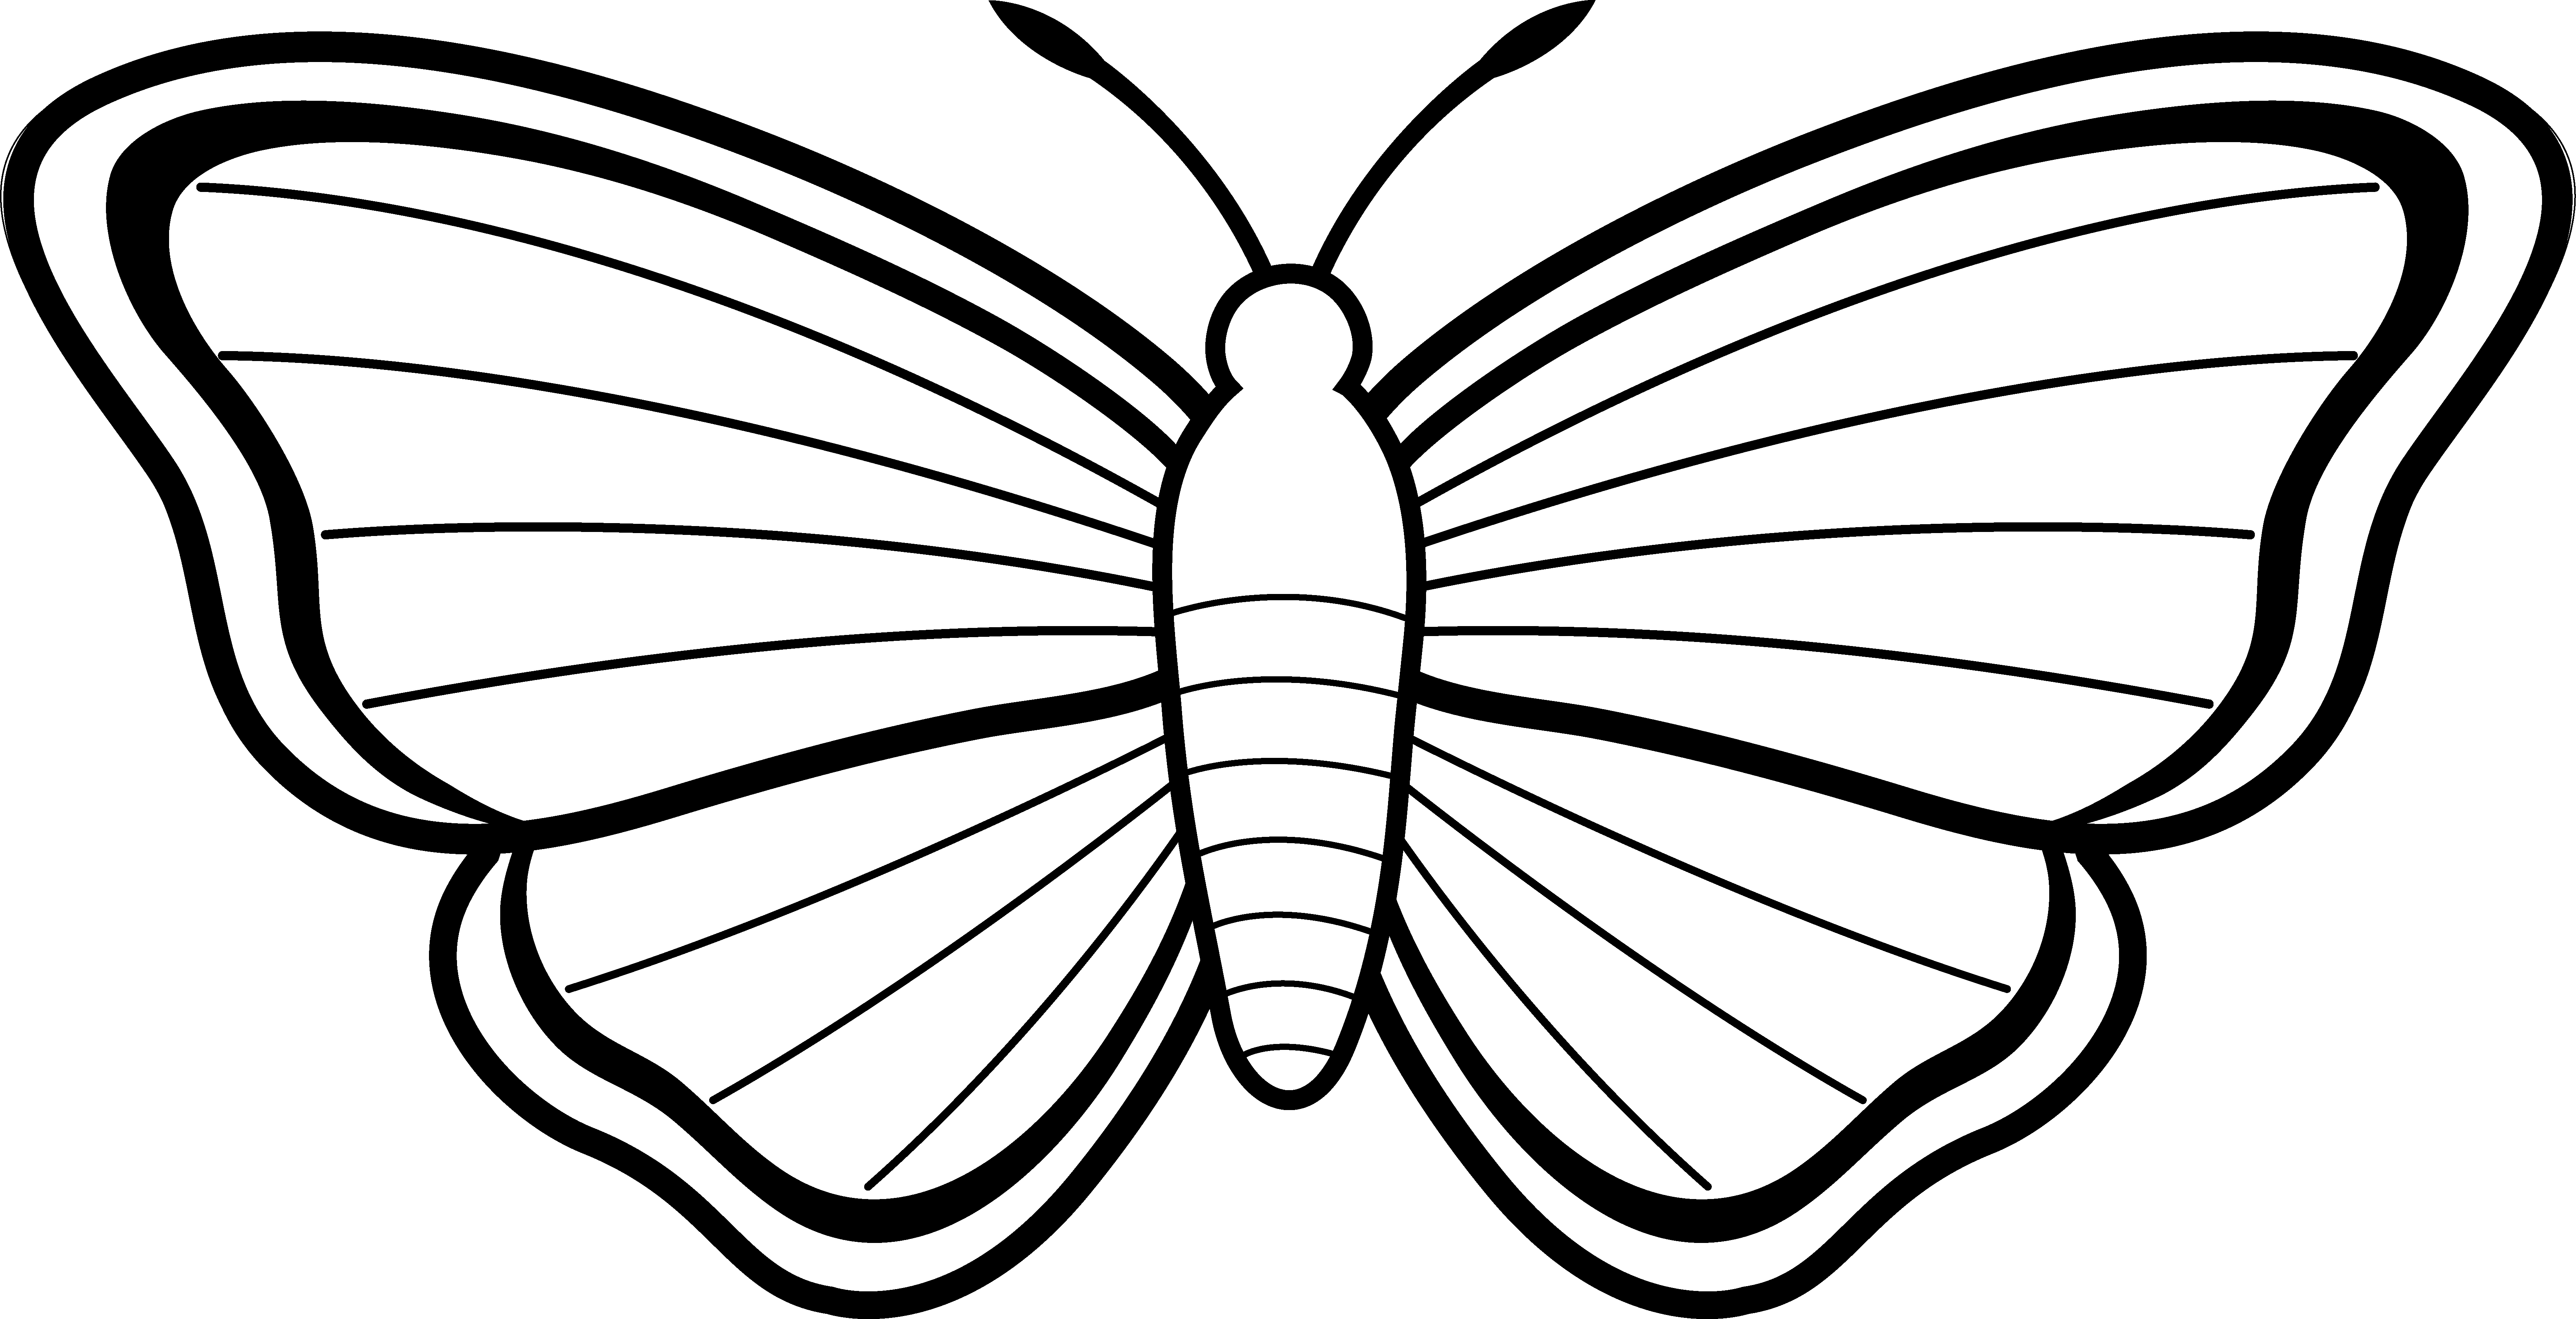 Butterfly outline panda free. Wing clipart easy